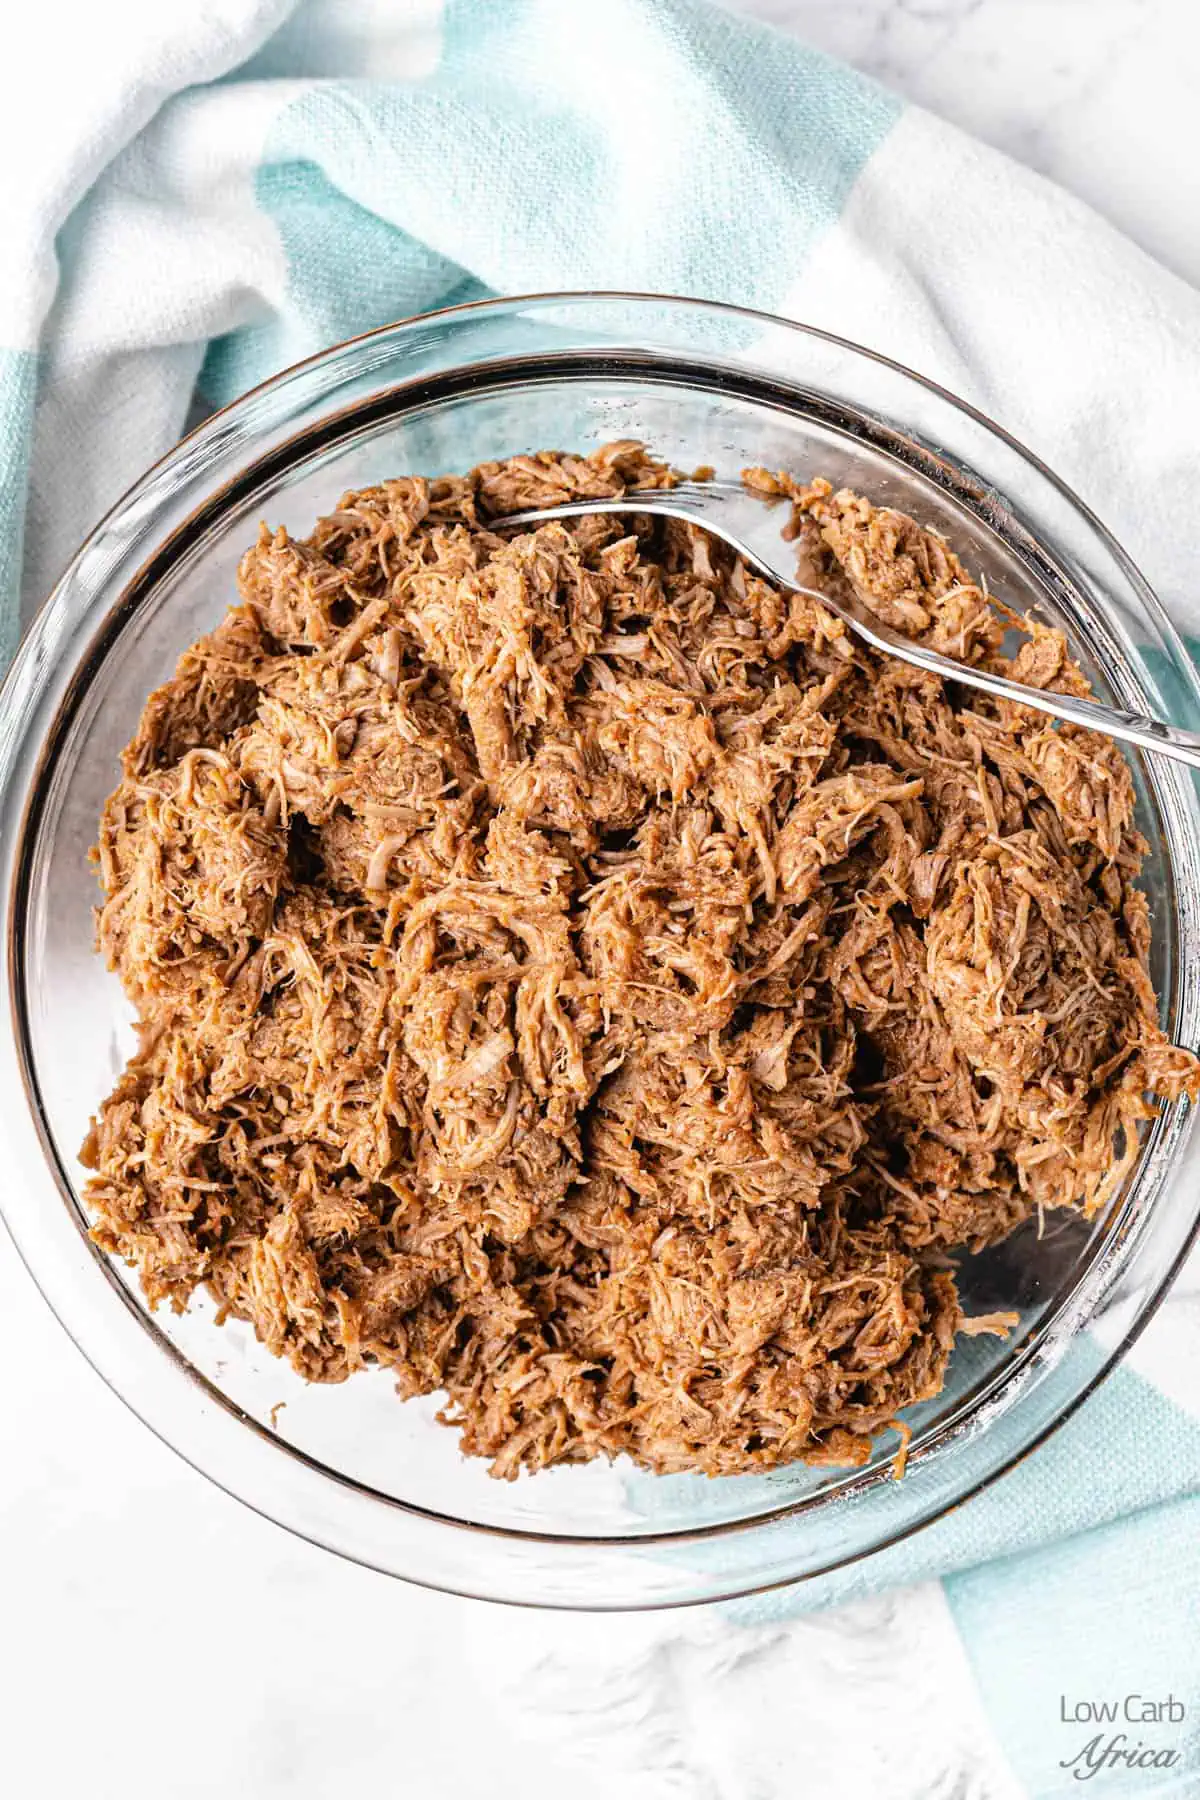 Instant Pot Pulled Pork ready to eat